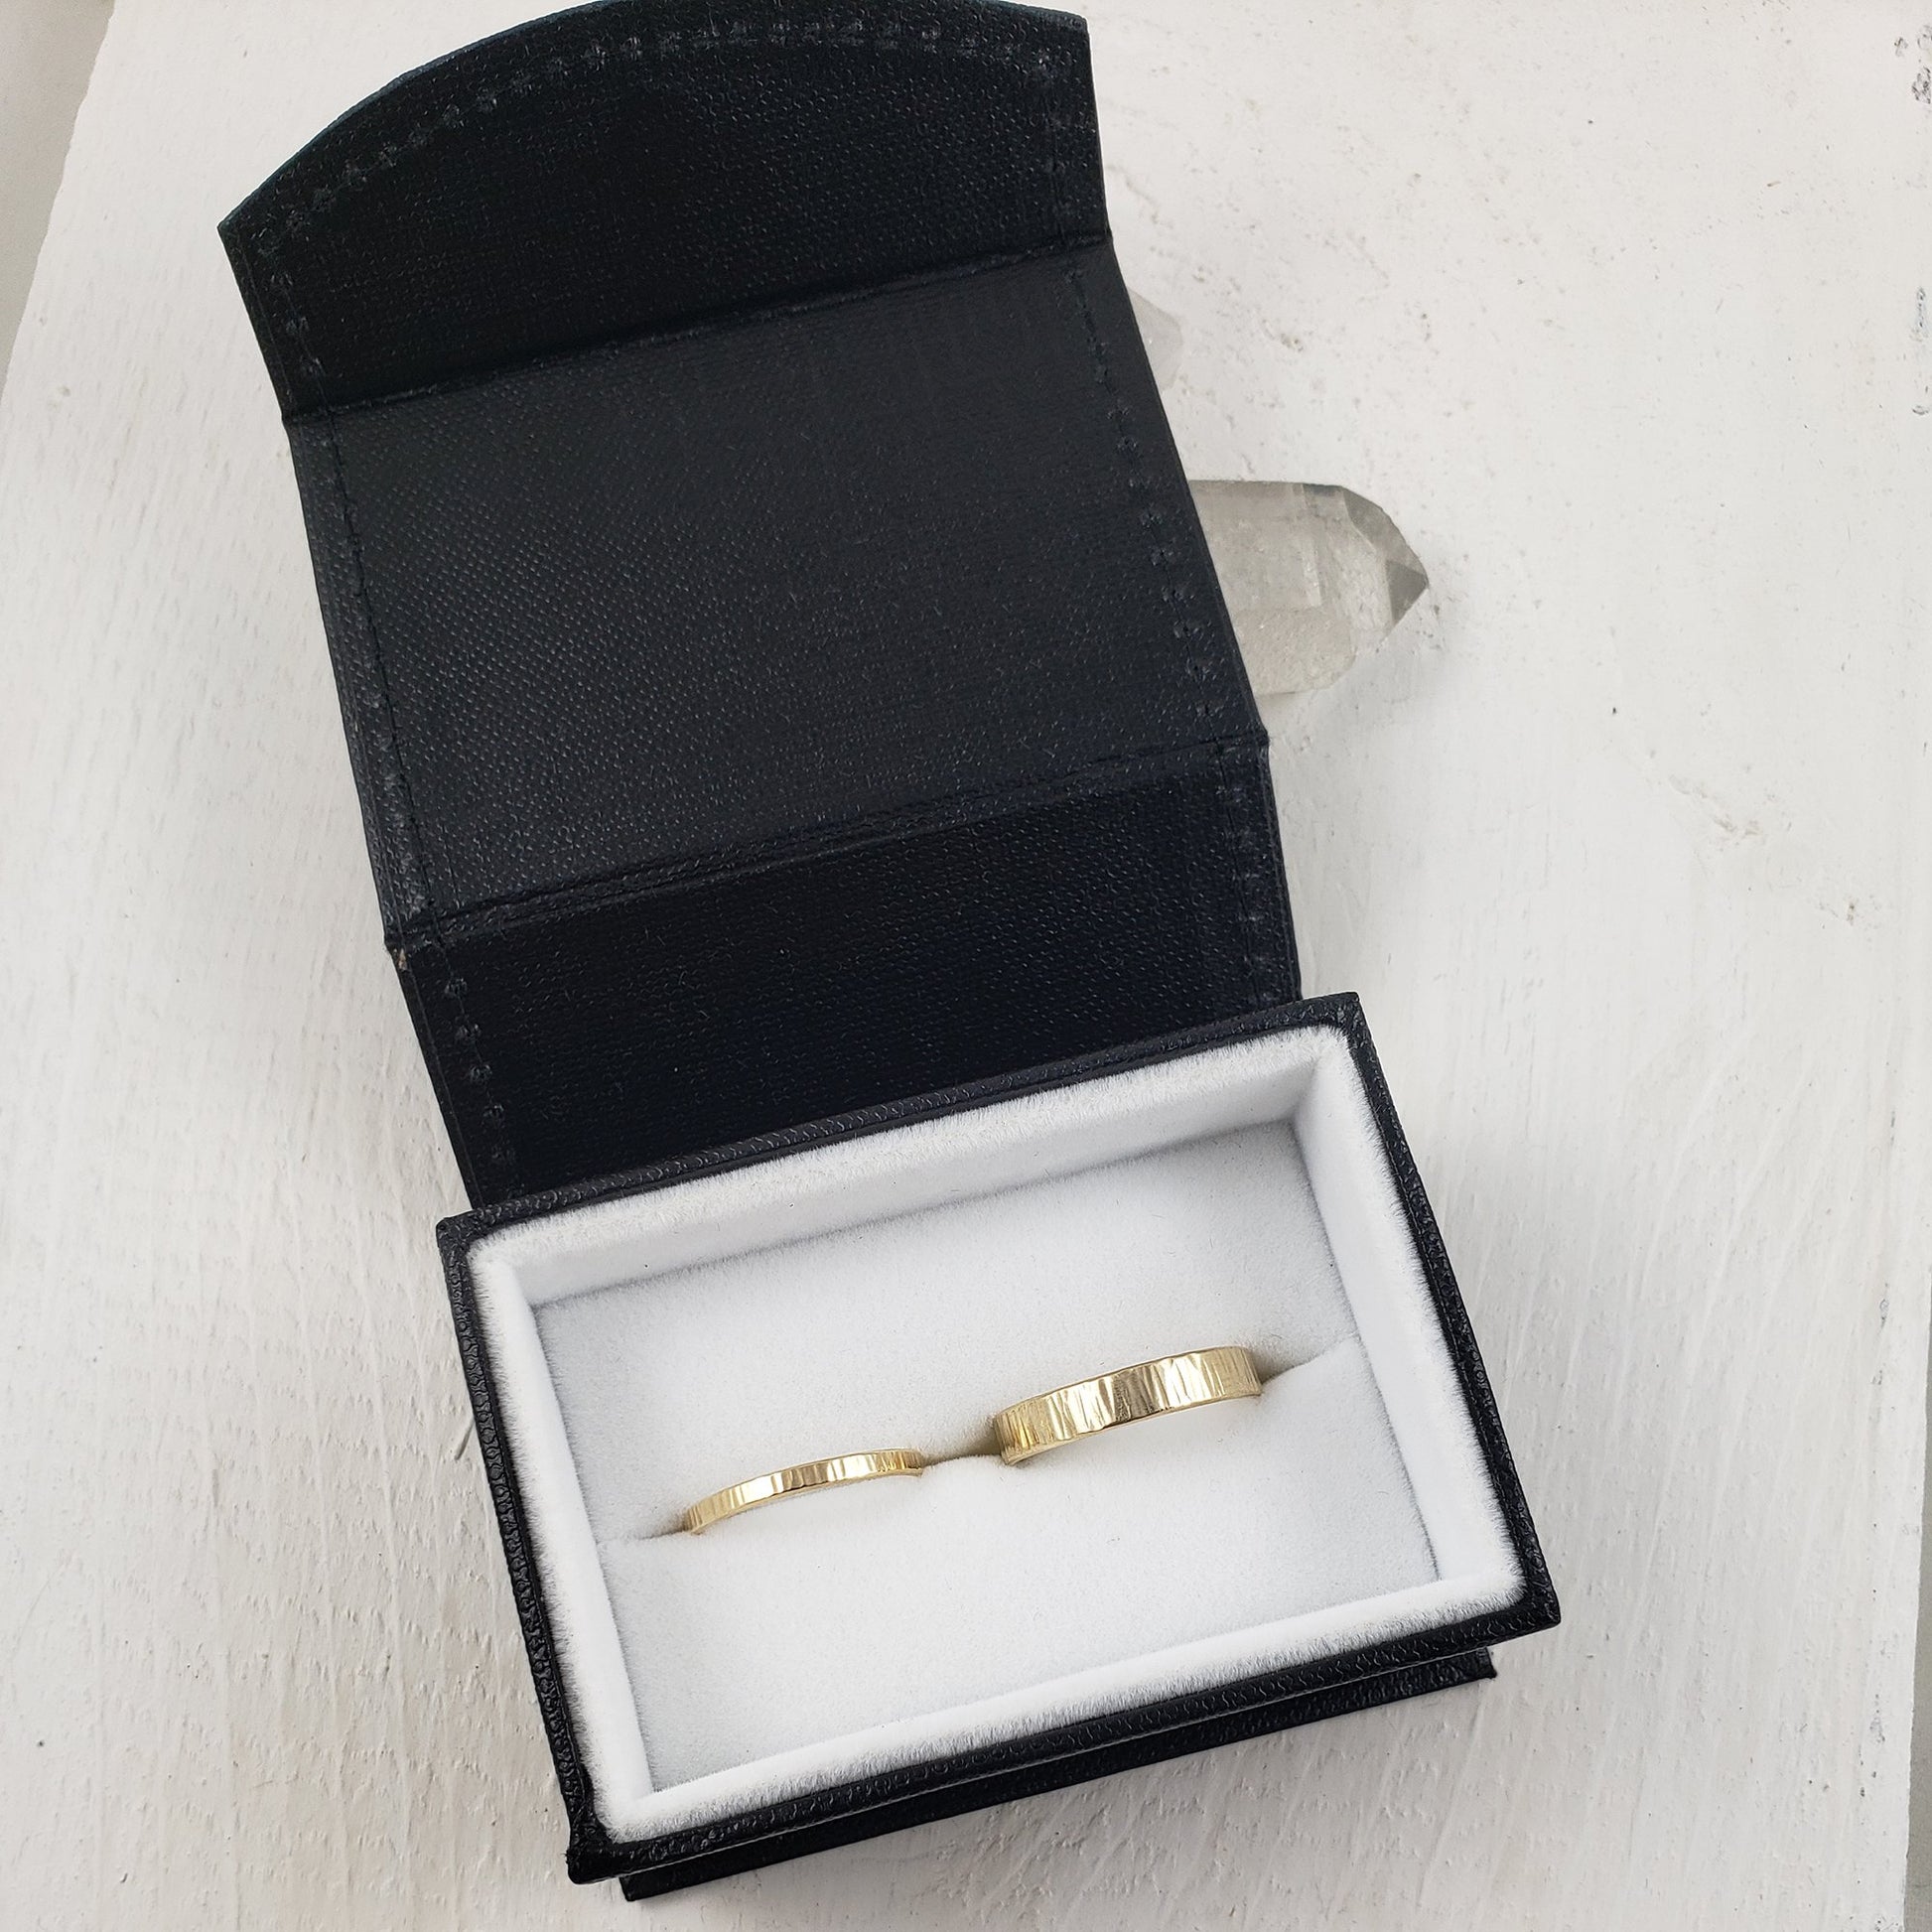 Handmade in Canada by Gemspell, set of solid yellow gold wedding bands